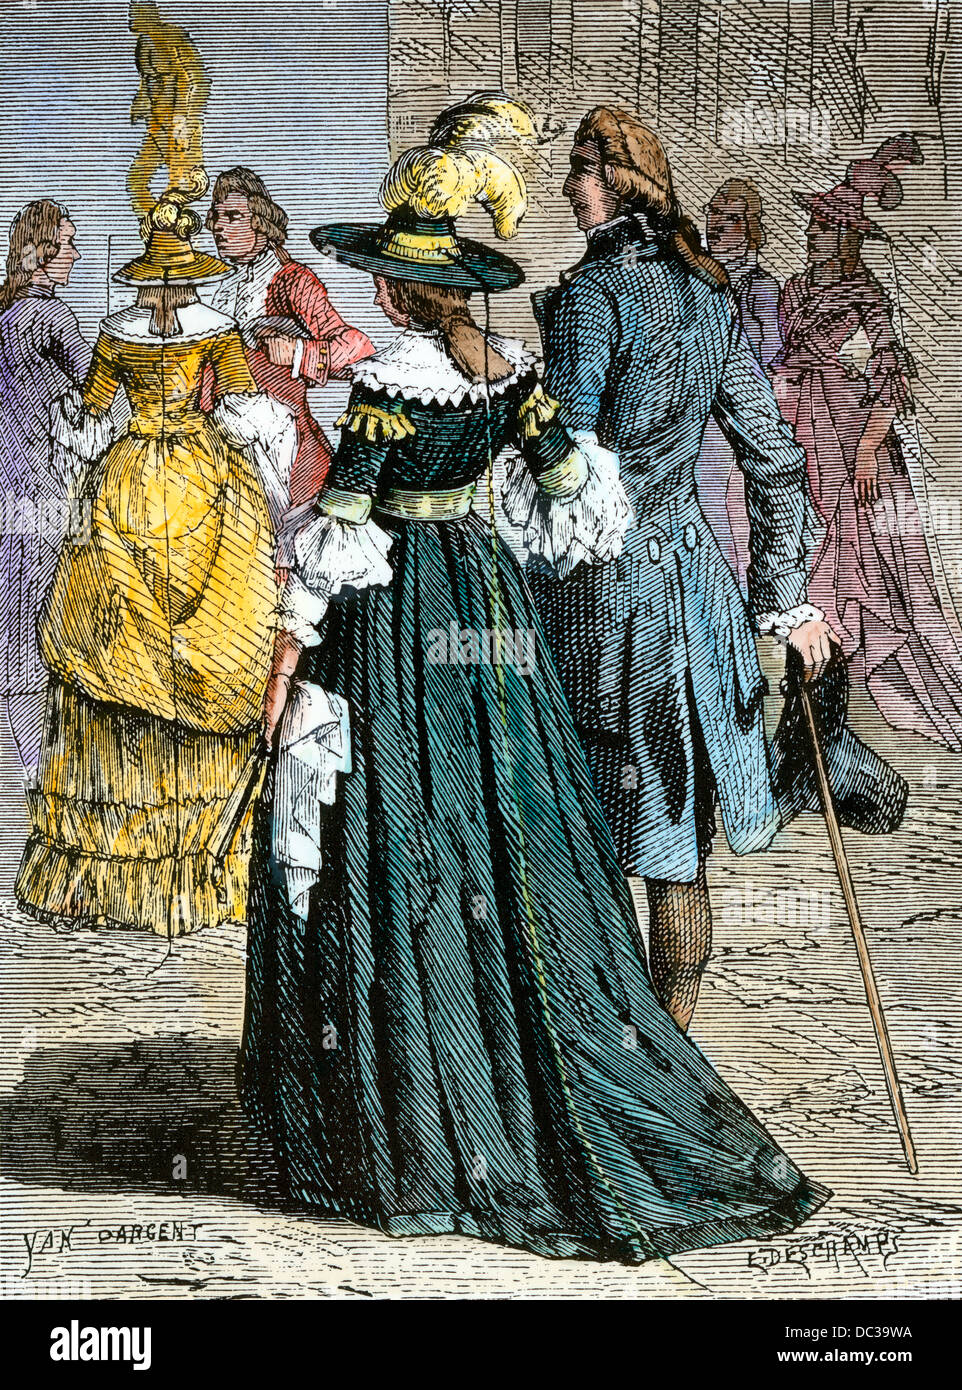 Lightning-rod hats, a Paris fashion inspired by Ben Franklin, 1778. Hand-colored woodcut Stock Photo